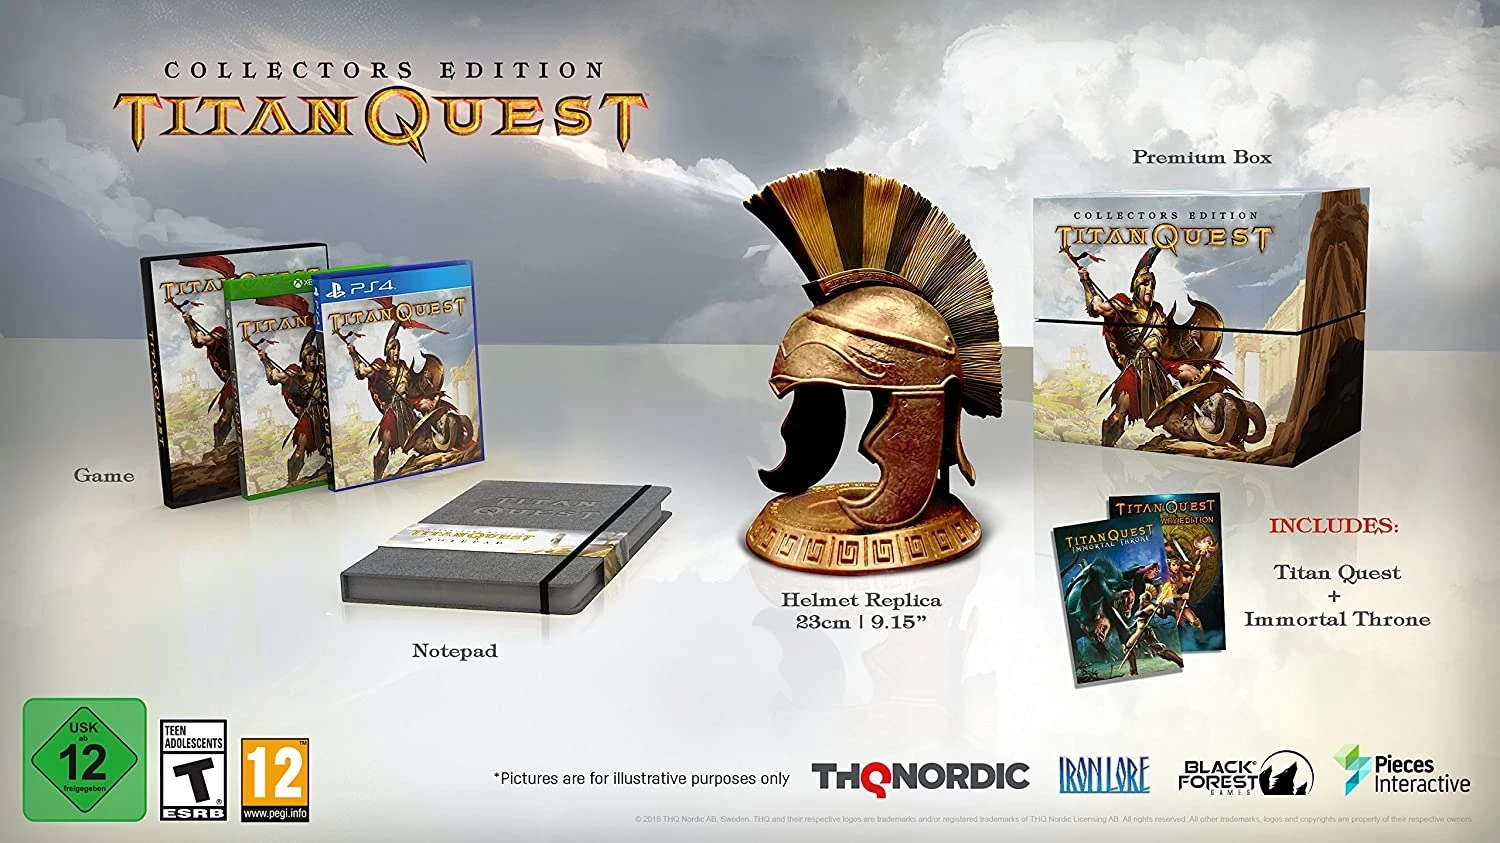 Titan Quest - Collector's edition (PS4), THQ Nordic